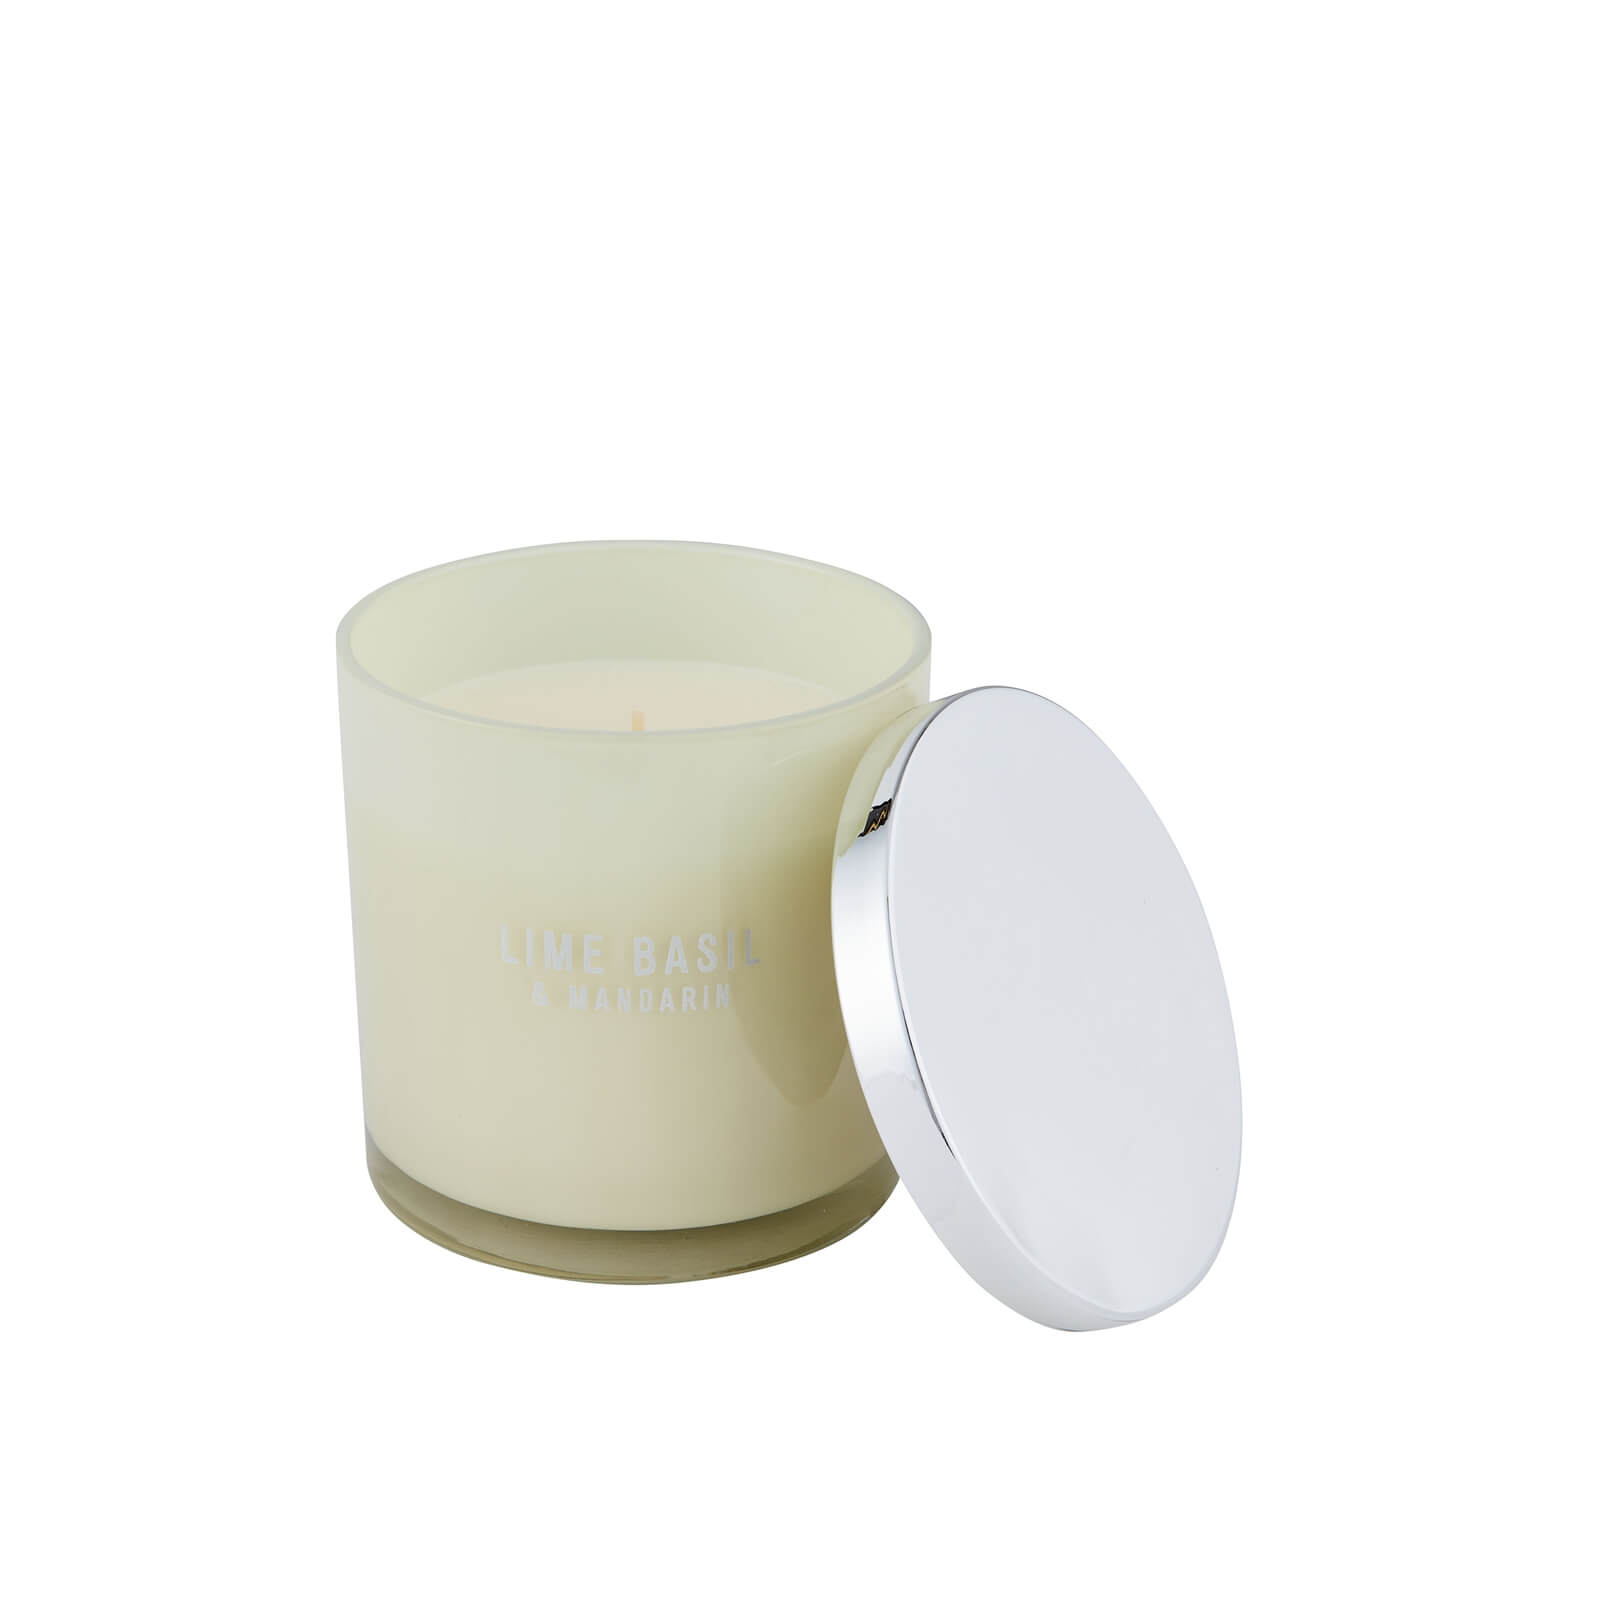 Lime Basil & Mandarin Candle with Lid